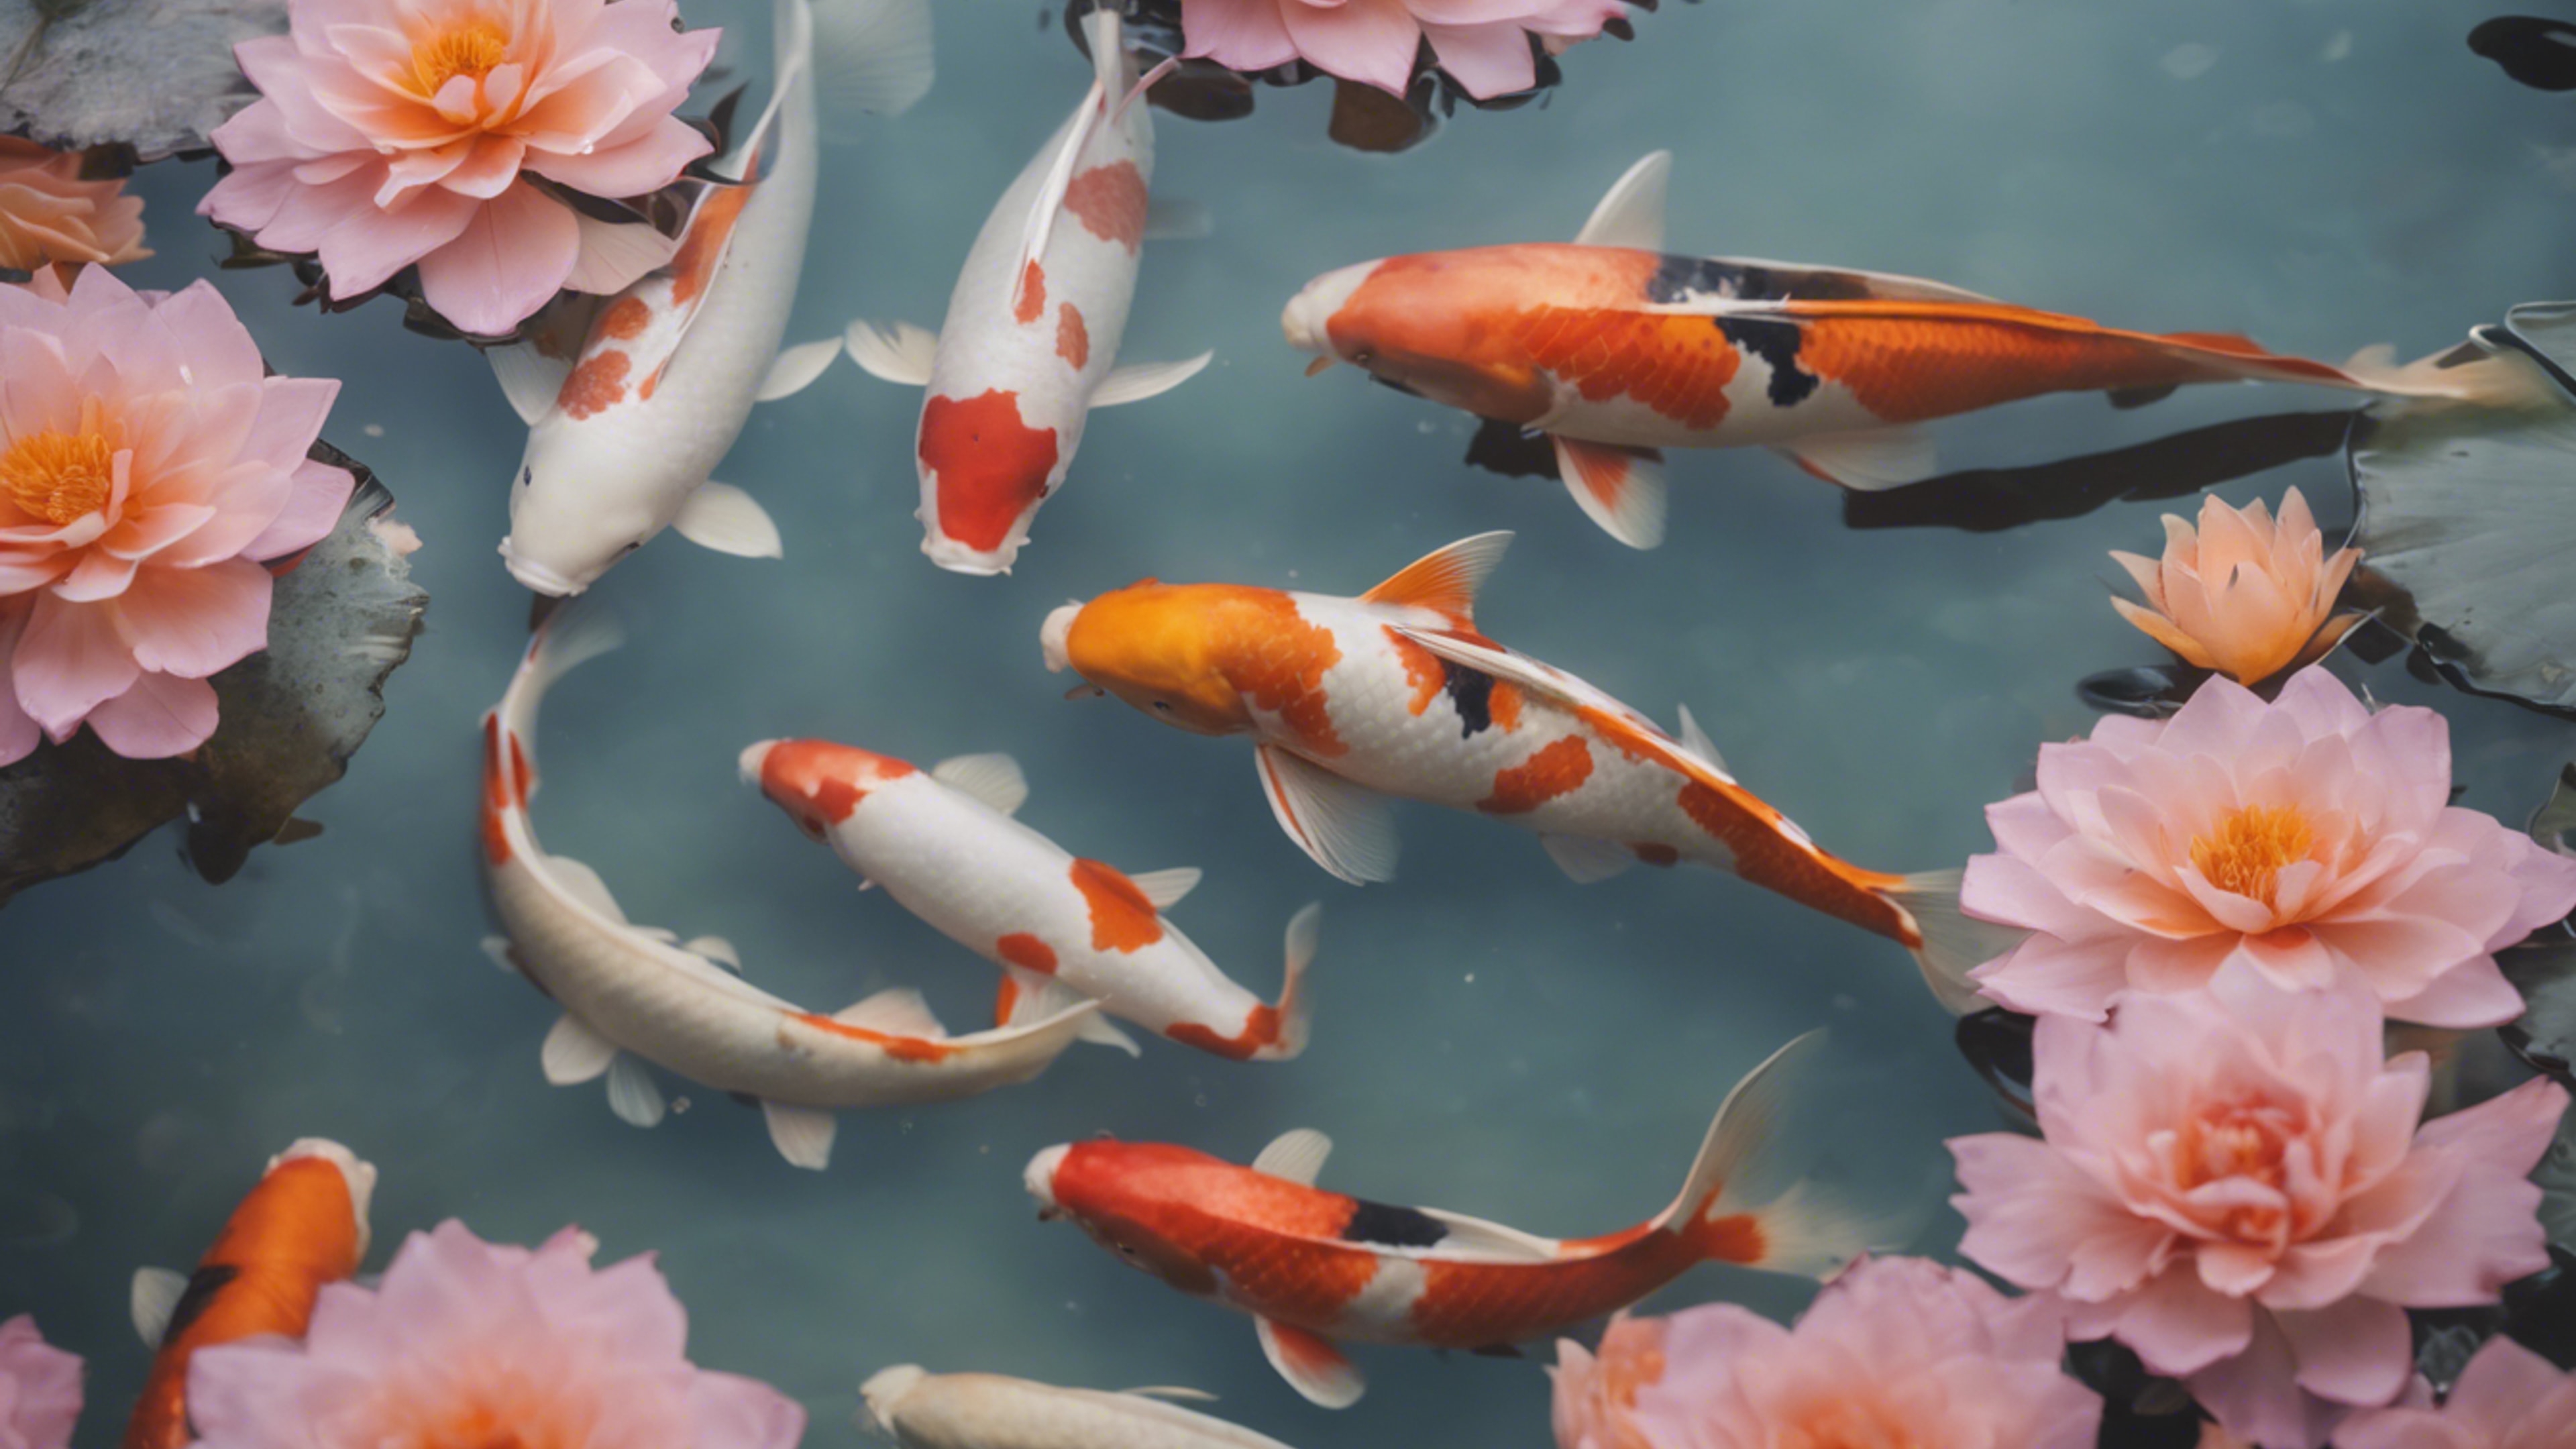 A garden scene featuring tranquil koi fishes in a cool pastel color pond. Tapeta[188bf594936145059e7f]